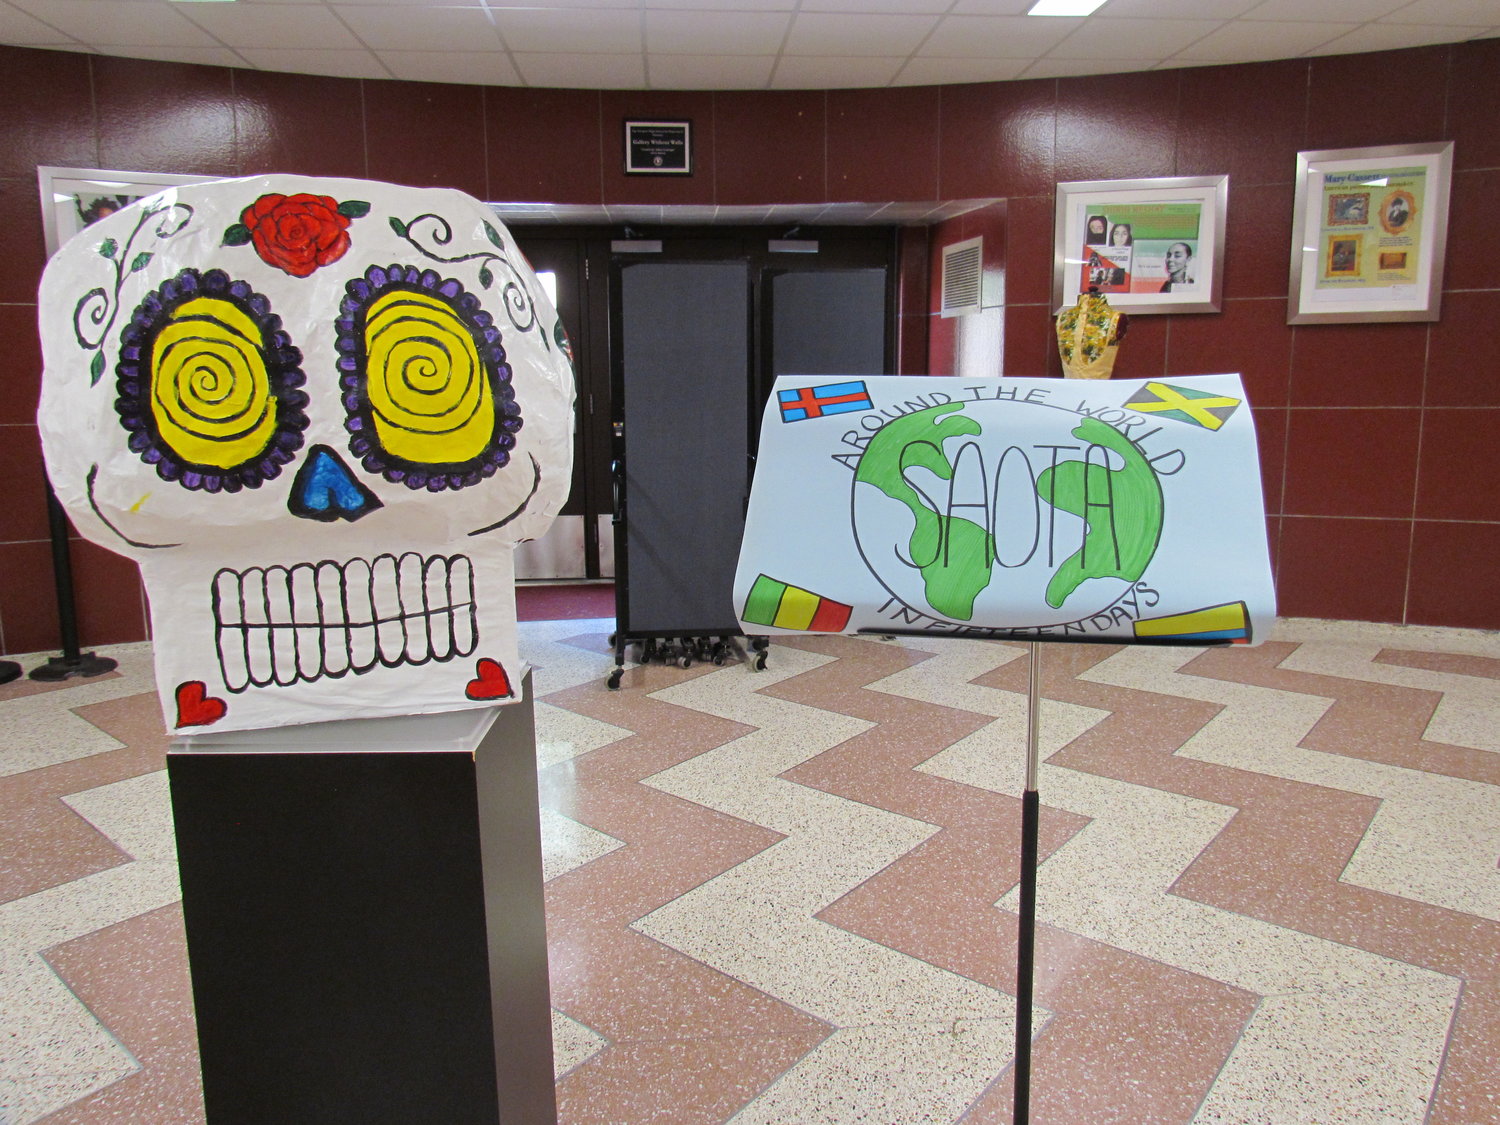 The exhibition of student artwork showcased diverse art forms from numerous cultures worldwide.